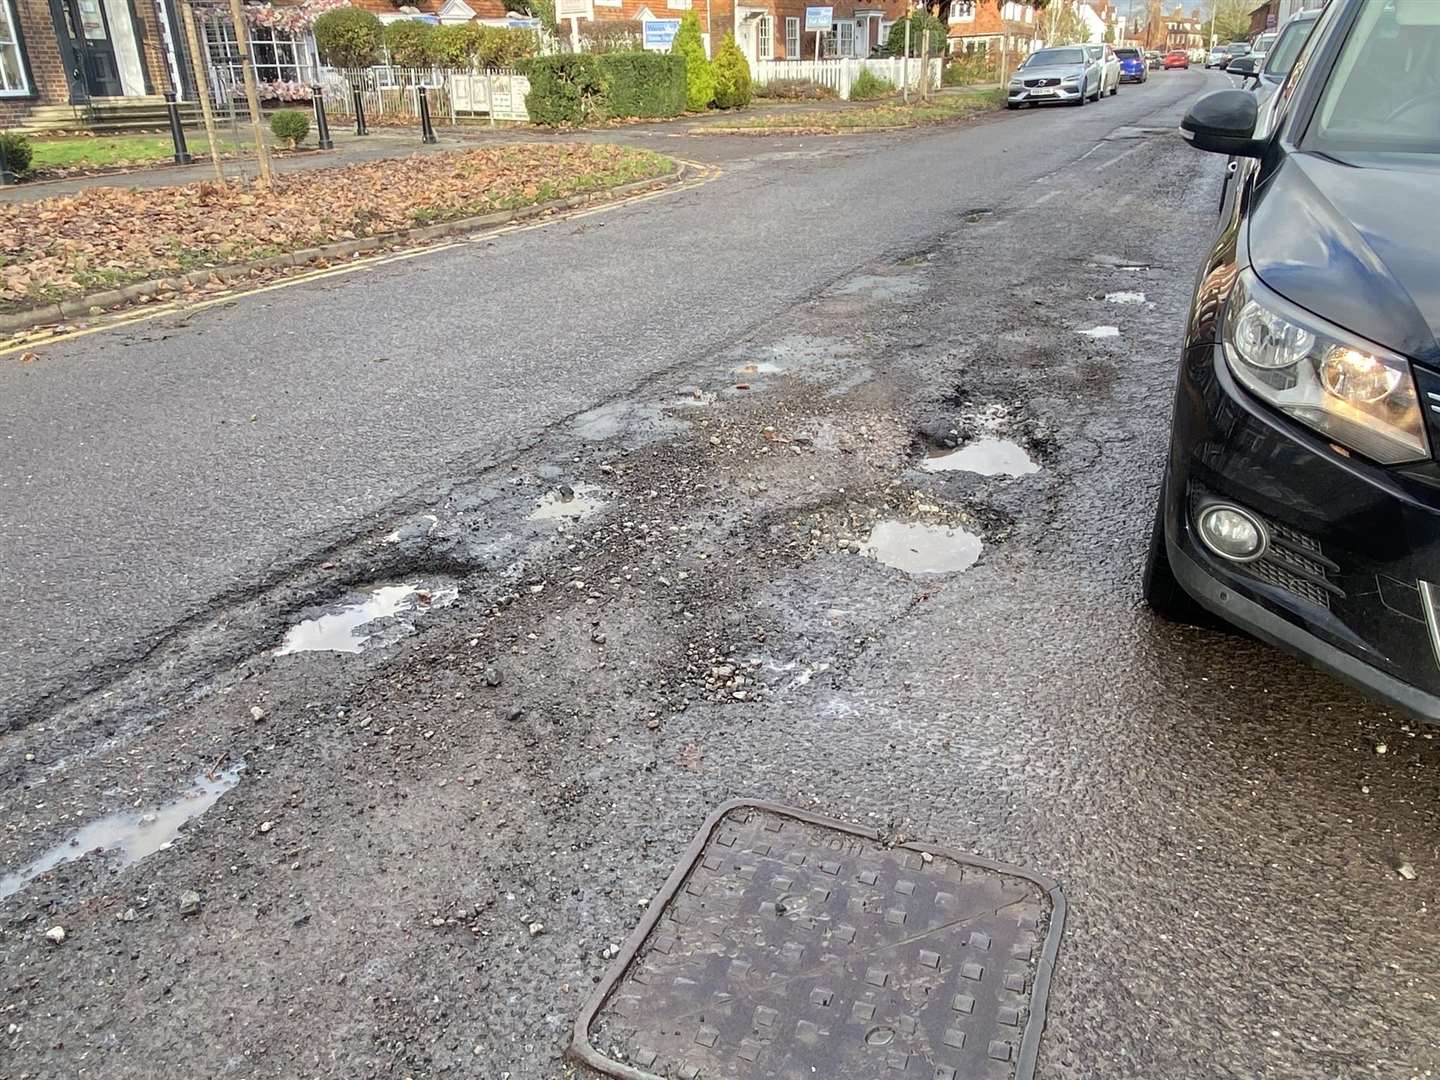 Residents say they have never known potholes to be so bad in Tenterden. Picture: My Tenterden